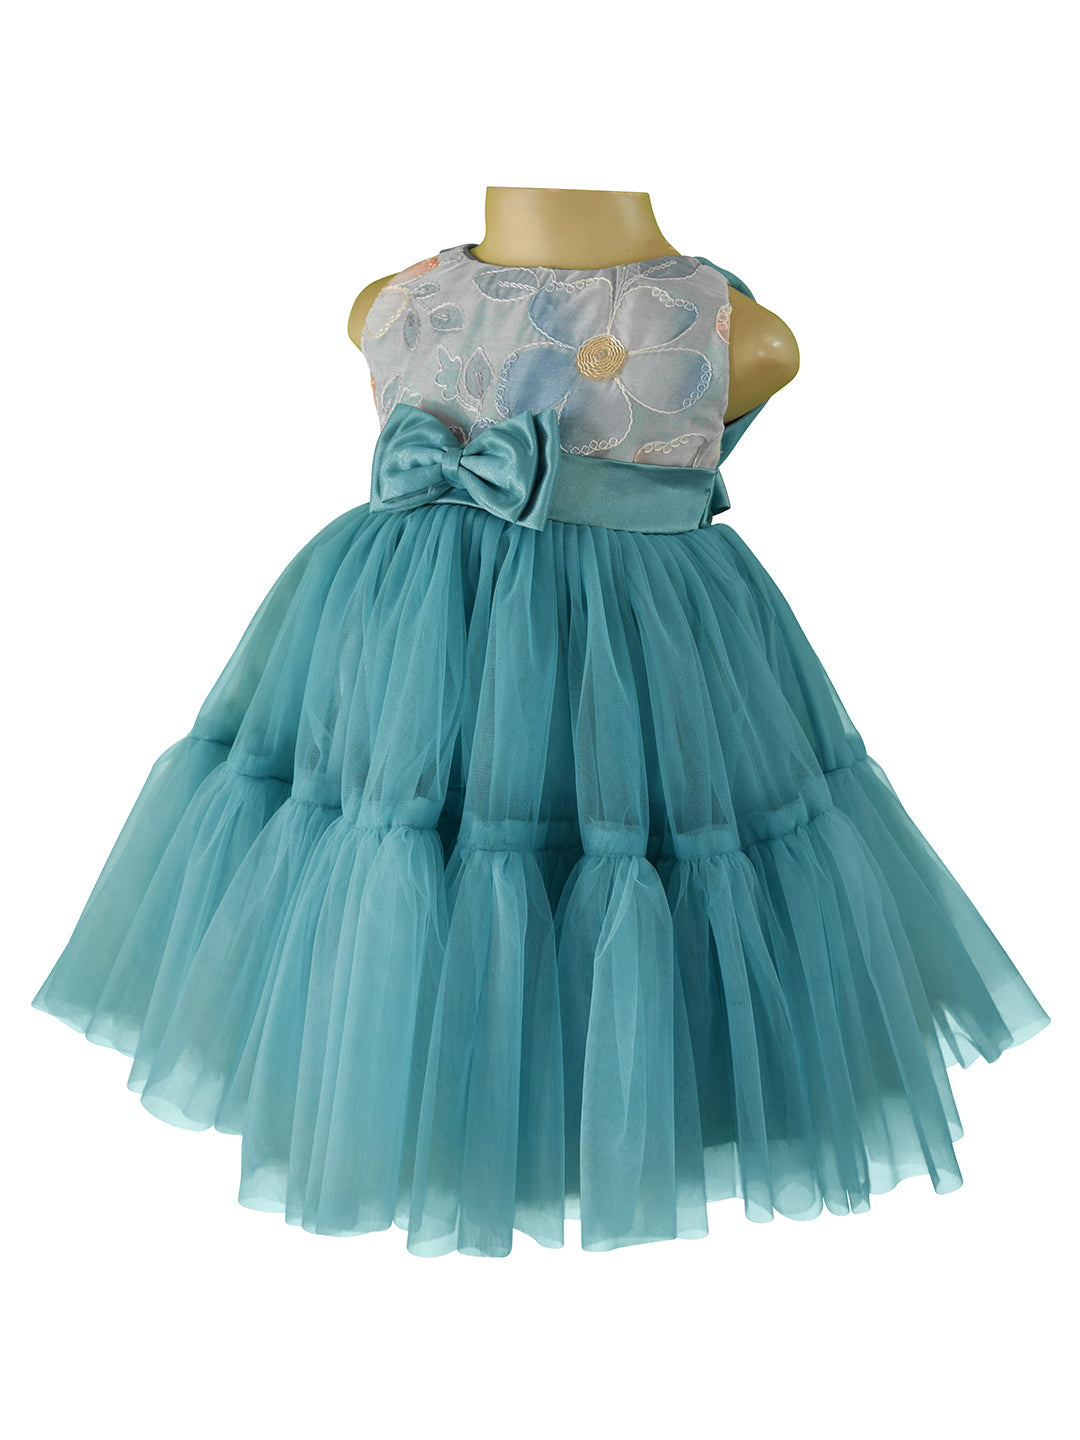 Girls Party Dress_Faye Aegean Teal Embroidered Tiered Dress